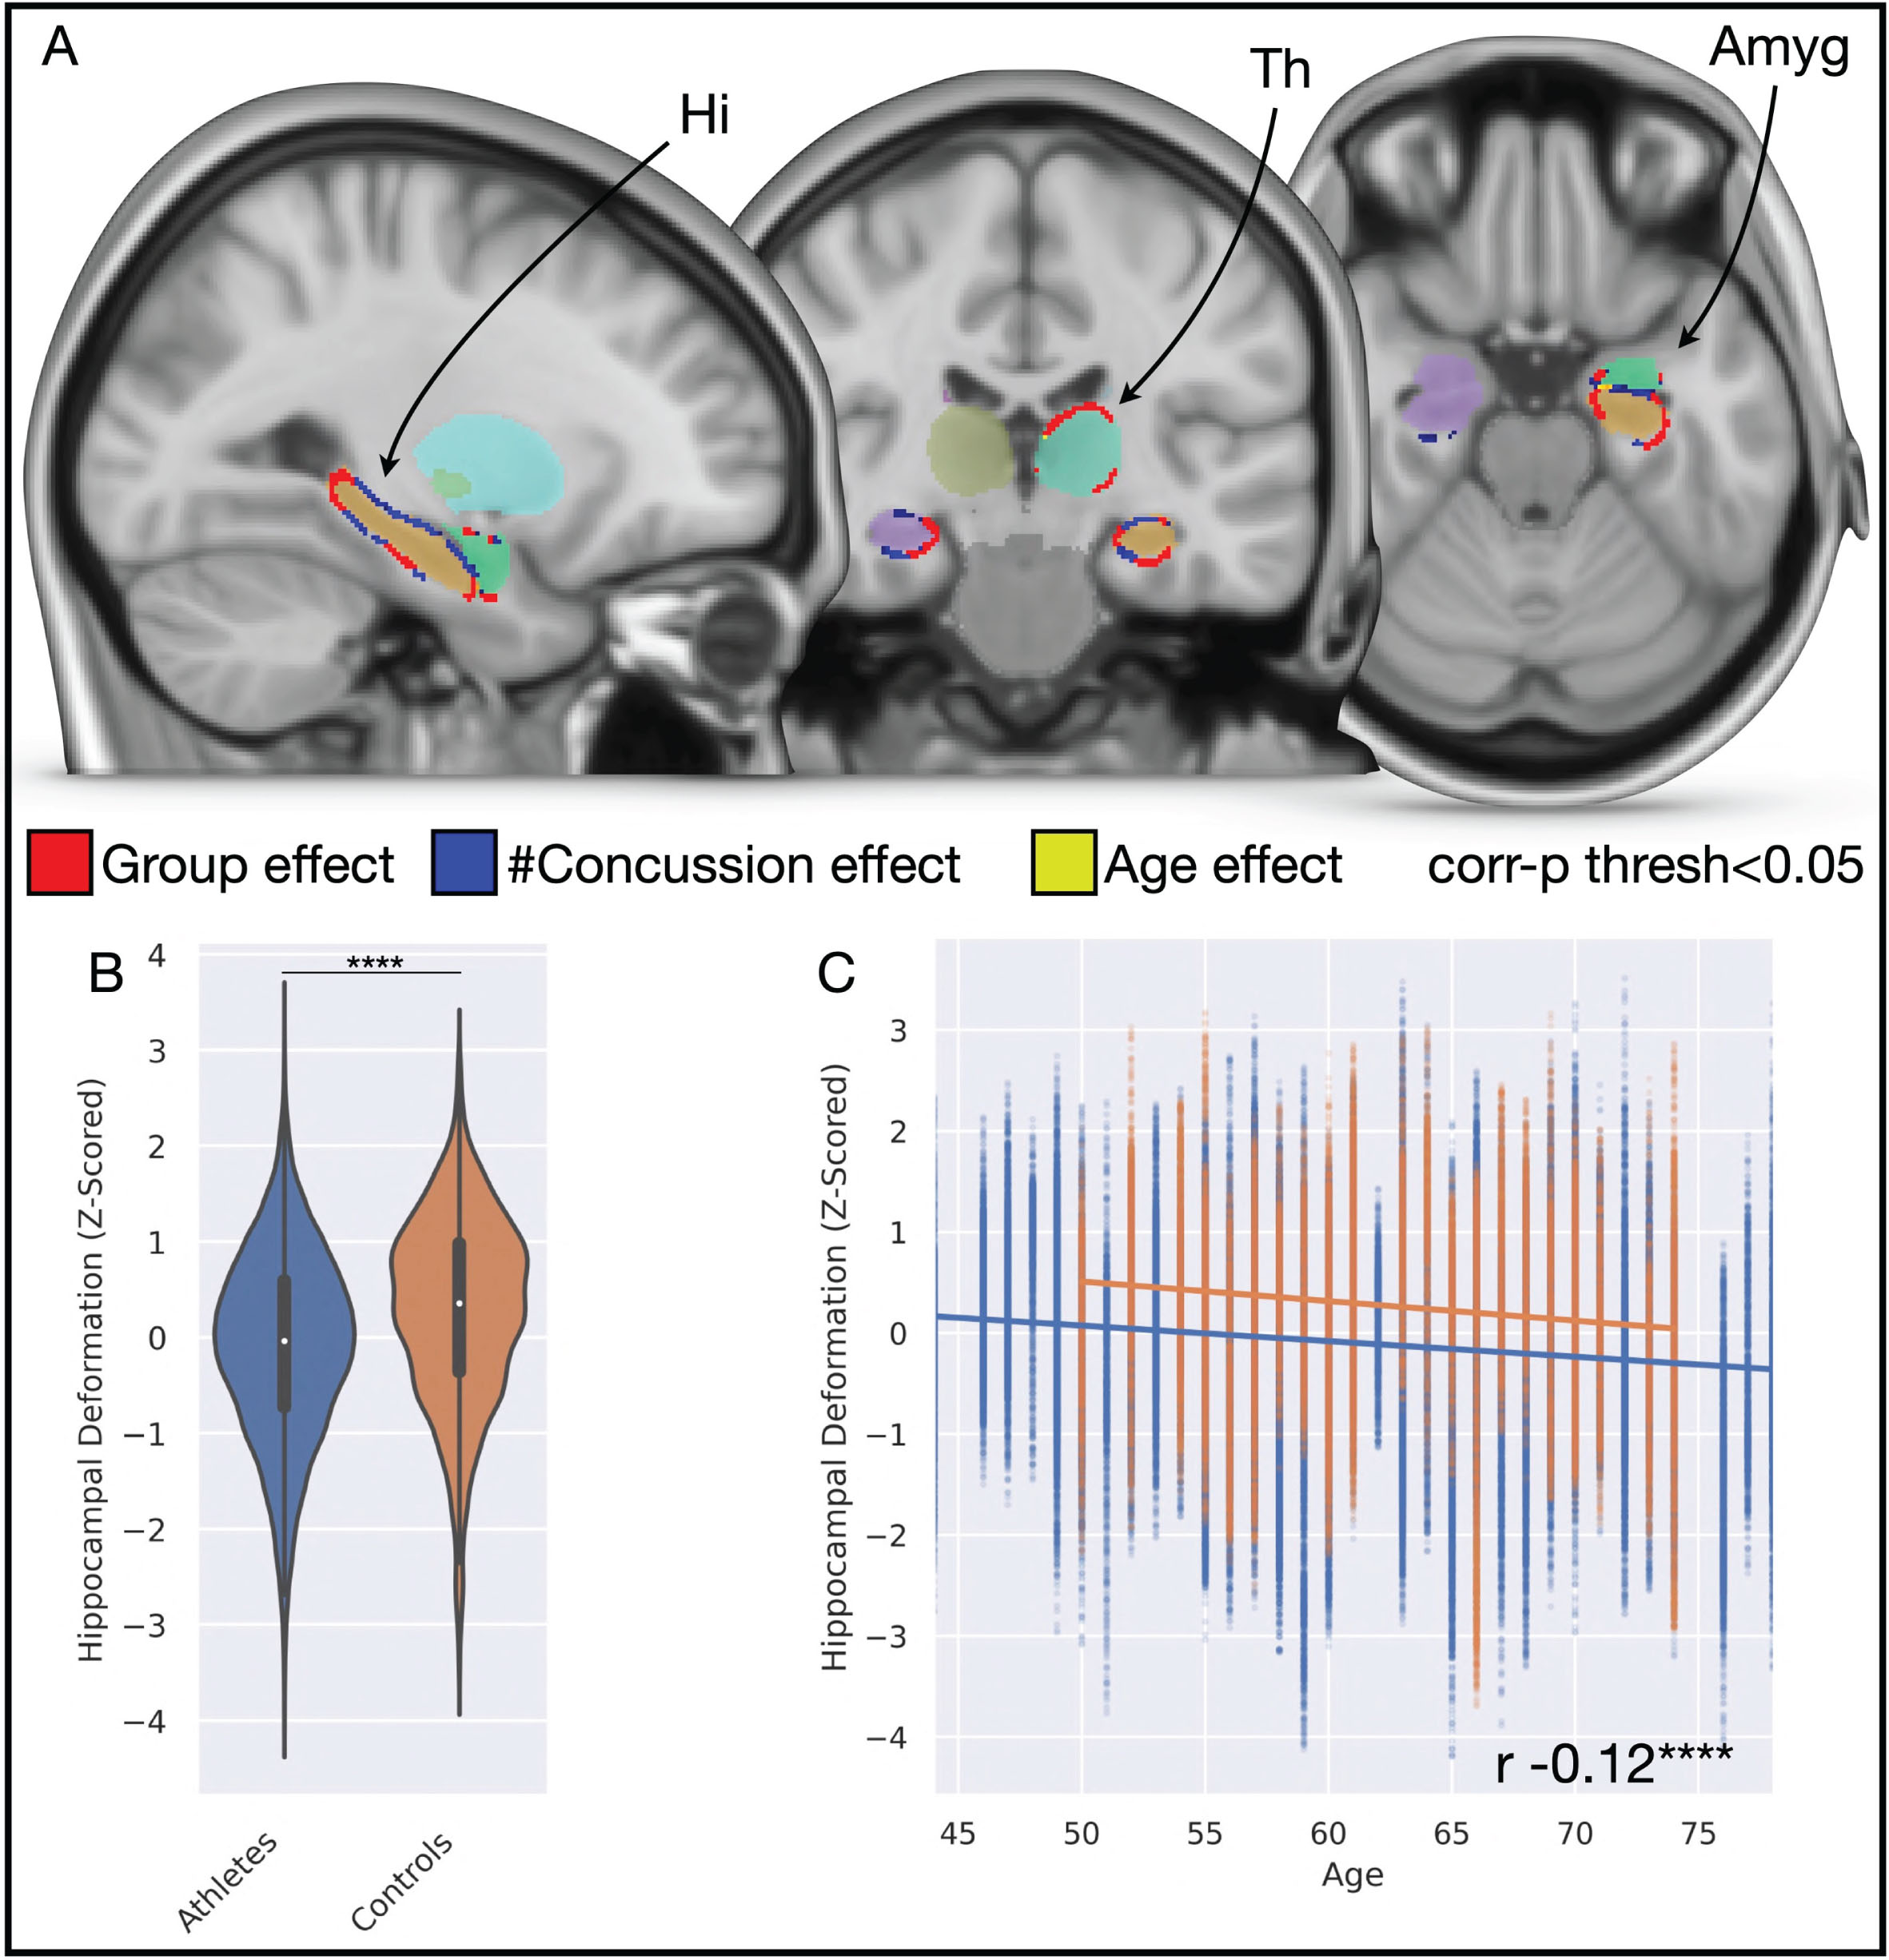 Subcortical shape and appearance differences across the cohort. A) Brain slices illustrate significant differences in morphology of the hippocampus bilaterally, the left thalamus, and left amygdala with associations to group (red), the number of concussions (blue), and age (yellow). B) Violin plot illustrates bilateral hippocampal shape deformation significantly favors inward deformation in the athlete group, compared to controls. C) Scatterplot with linear regression illustrates that hippocampal shape significantly tends to inward deformation with increasing age in both groups, but that the gradient decline is not significantly different between groups, indicative that findings are not merely driven by a function of age. Amyg, amygdala; Hi, hippocampus; Th, thalamus.